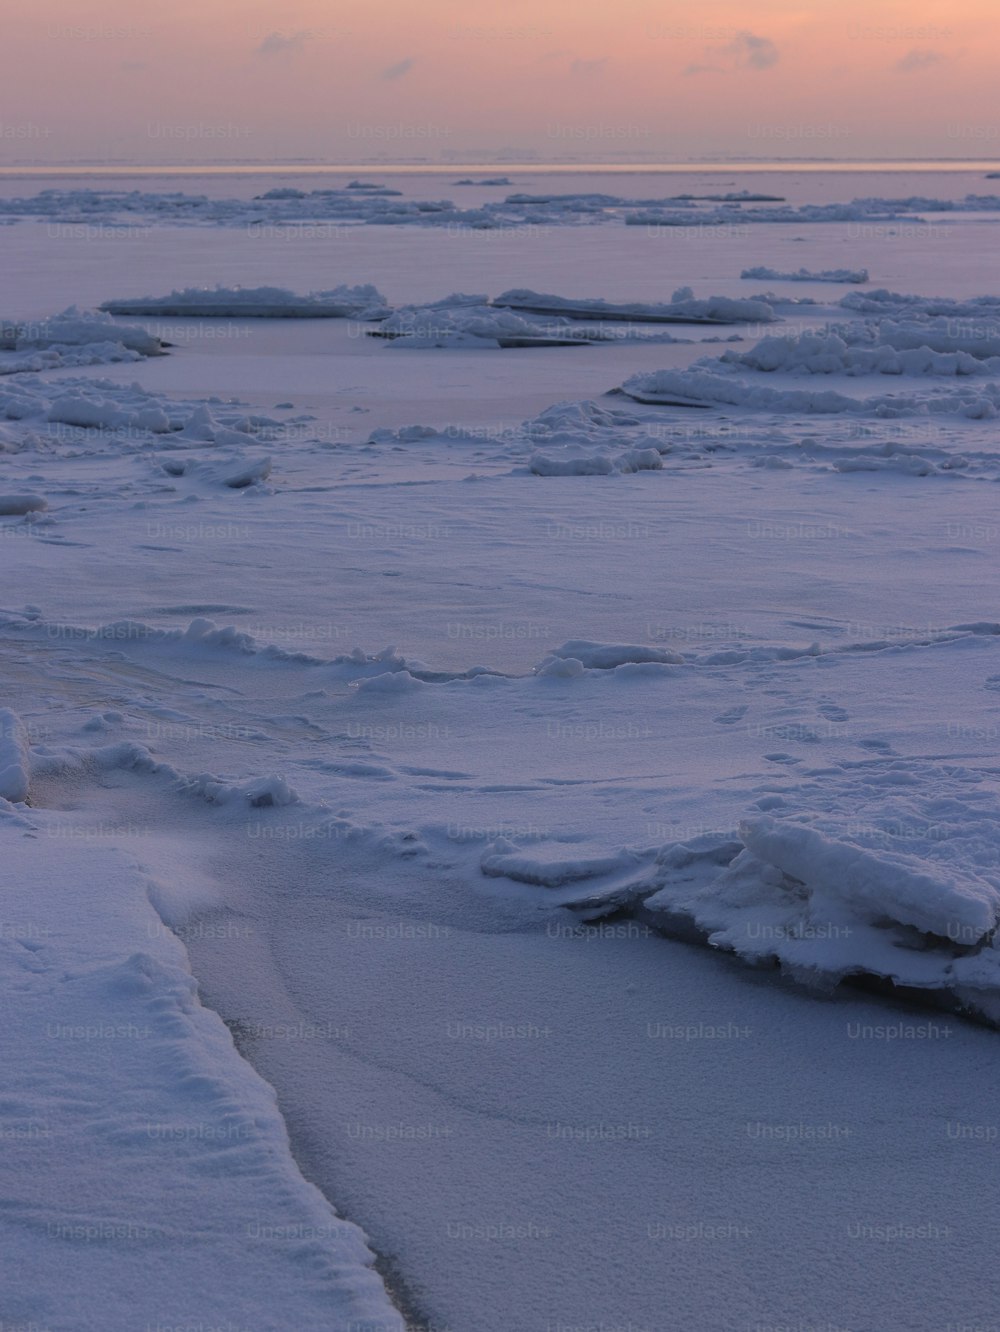 a snowy landscape with ice floes and a sunset in the background